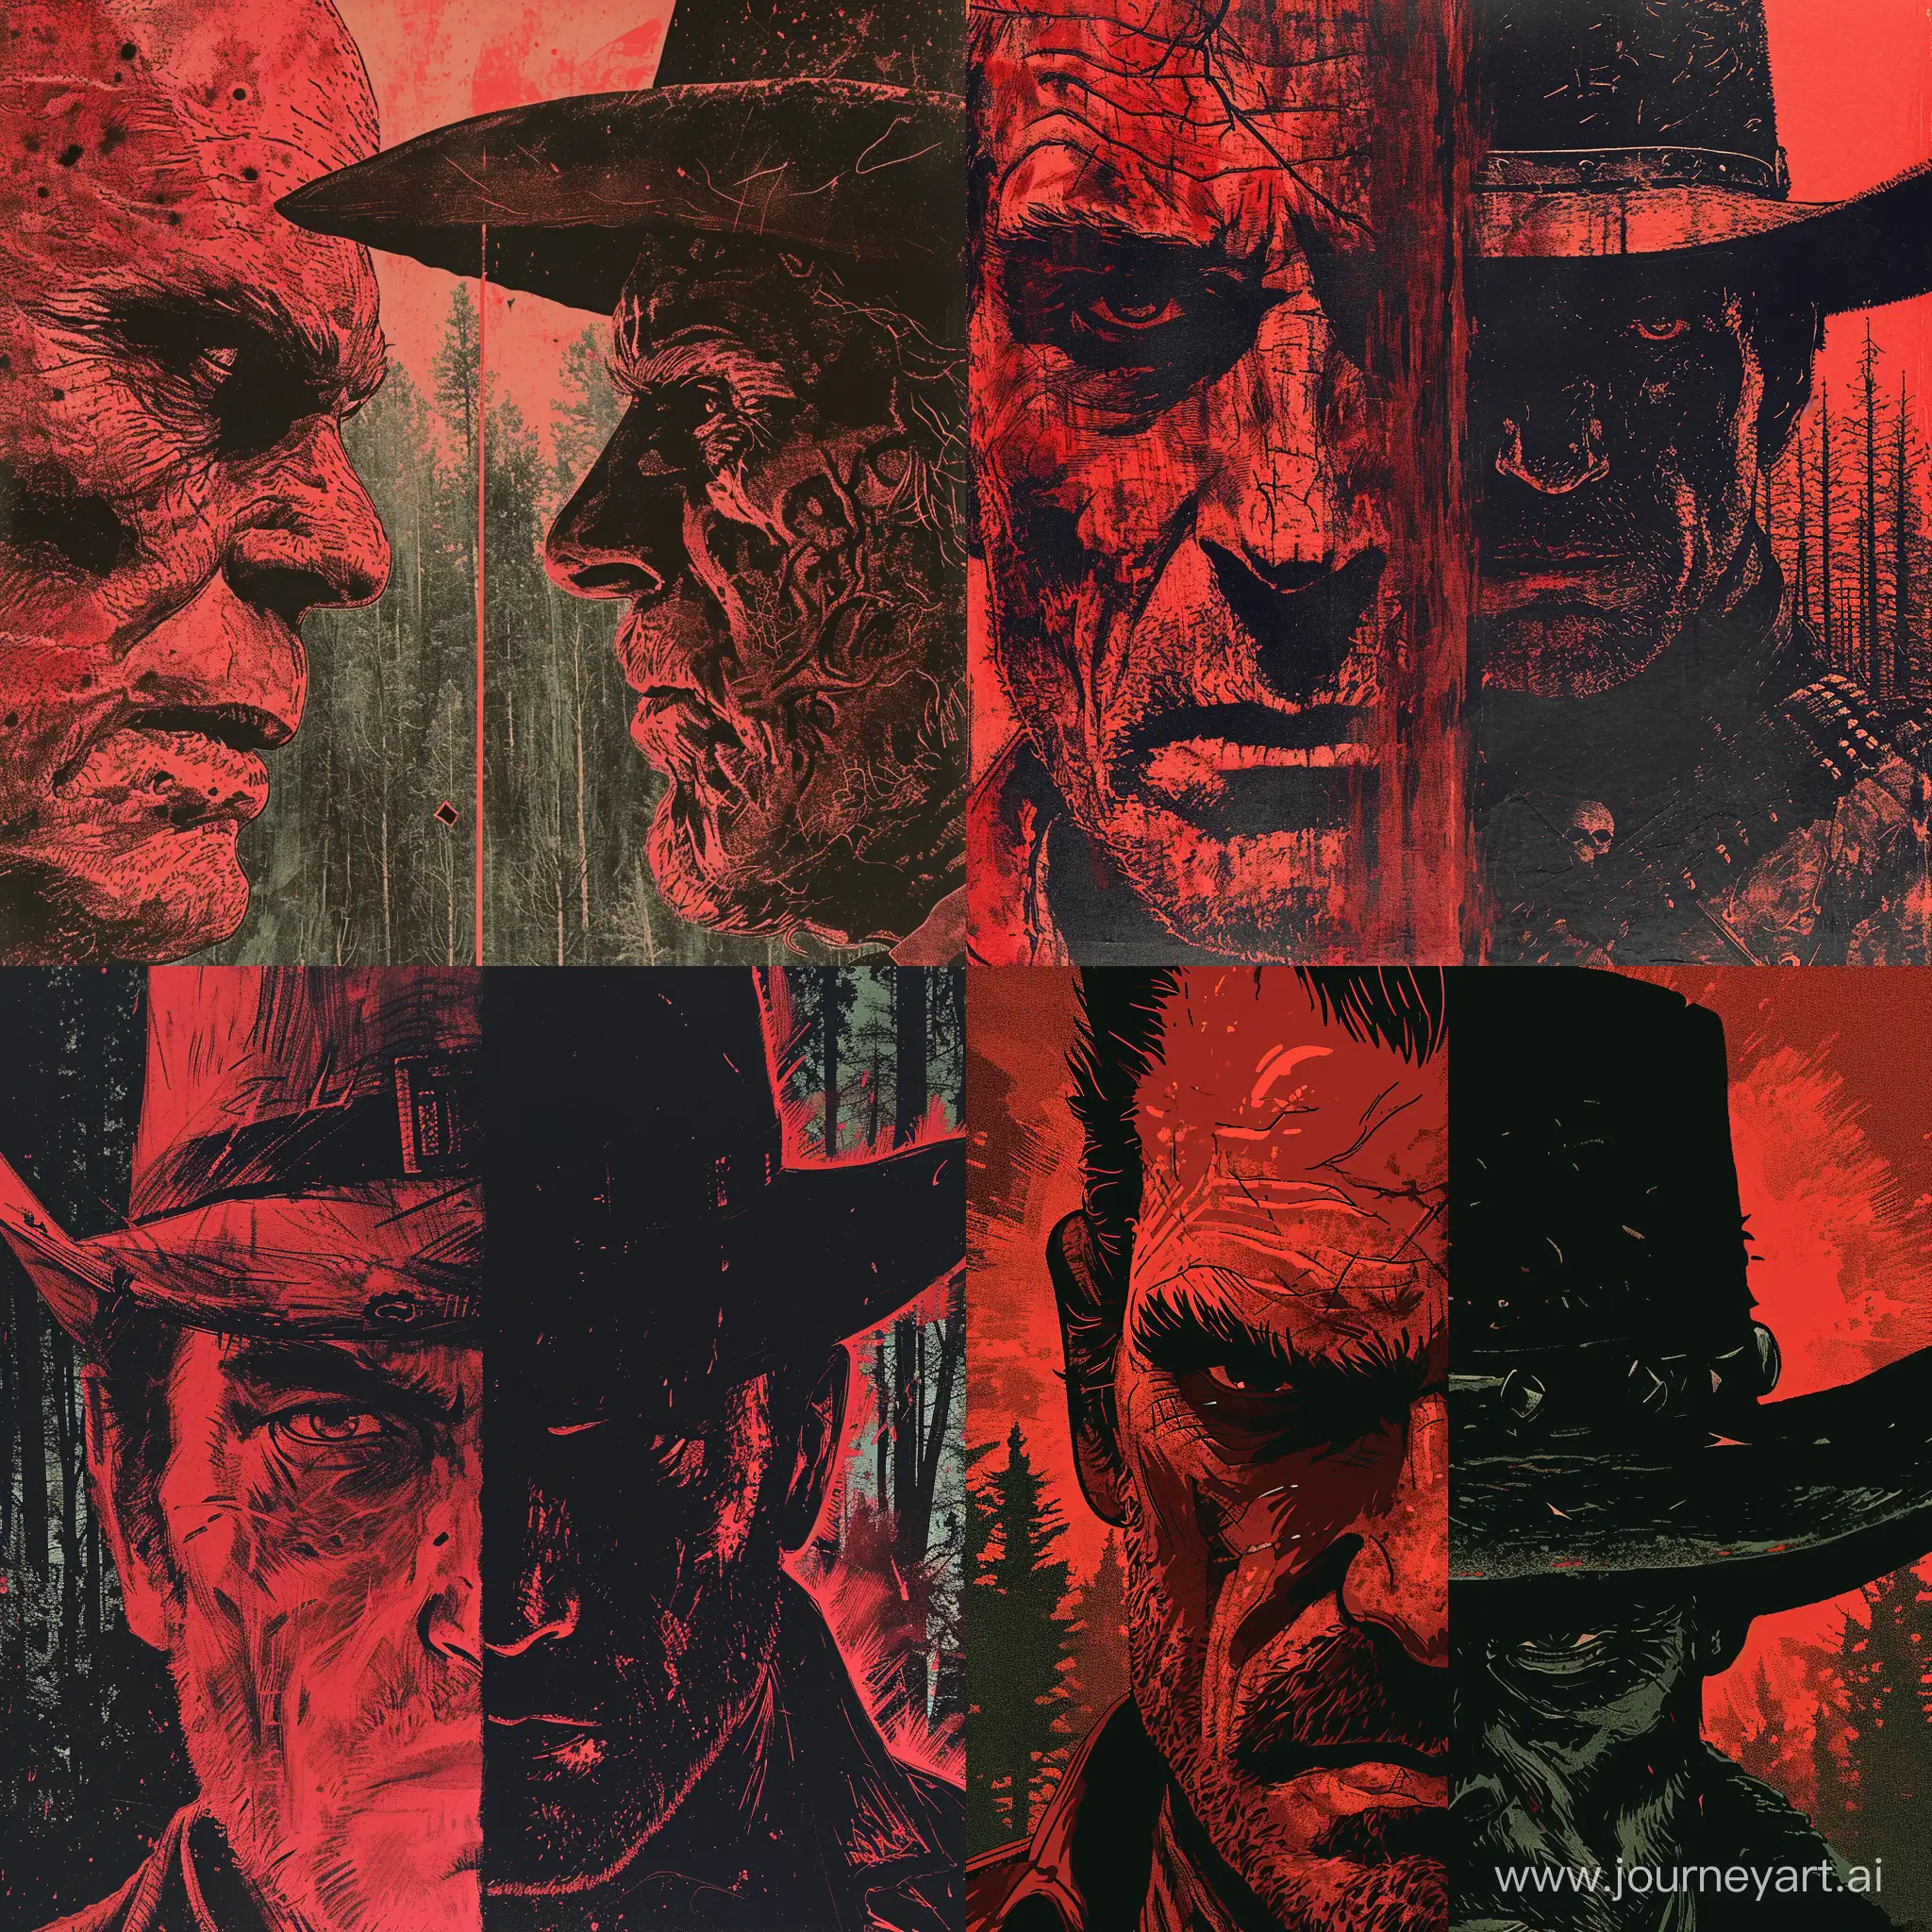 Let's make another image. Make a picture of two men. One is a sheriff, and the other is a man with a gun with a hat. Sheriff's extremely close-up face on the left side of the image, a man with a gun extremely close-up face on the right side of the image. Red and black color palette.  1970’s dark fantasy book cover paper art dungeon and dragons style. horizontal oriented. Forest in the background and in the center. The sheriff more red in color, man with the gun more black in color. Large distance between sheriff and man with a gun.